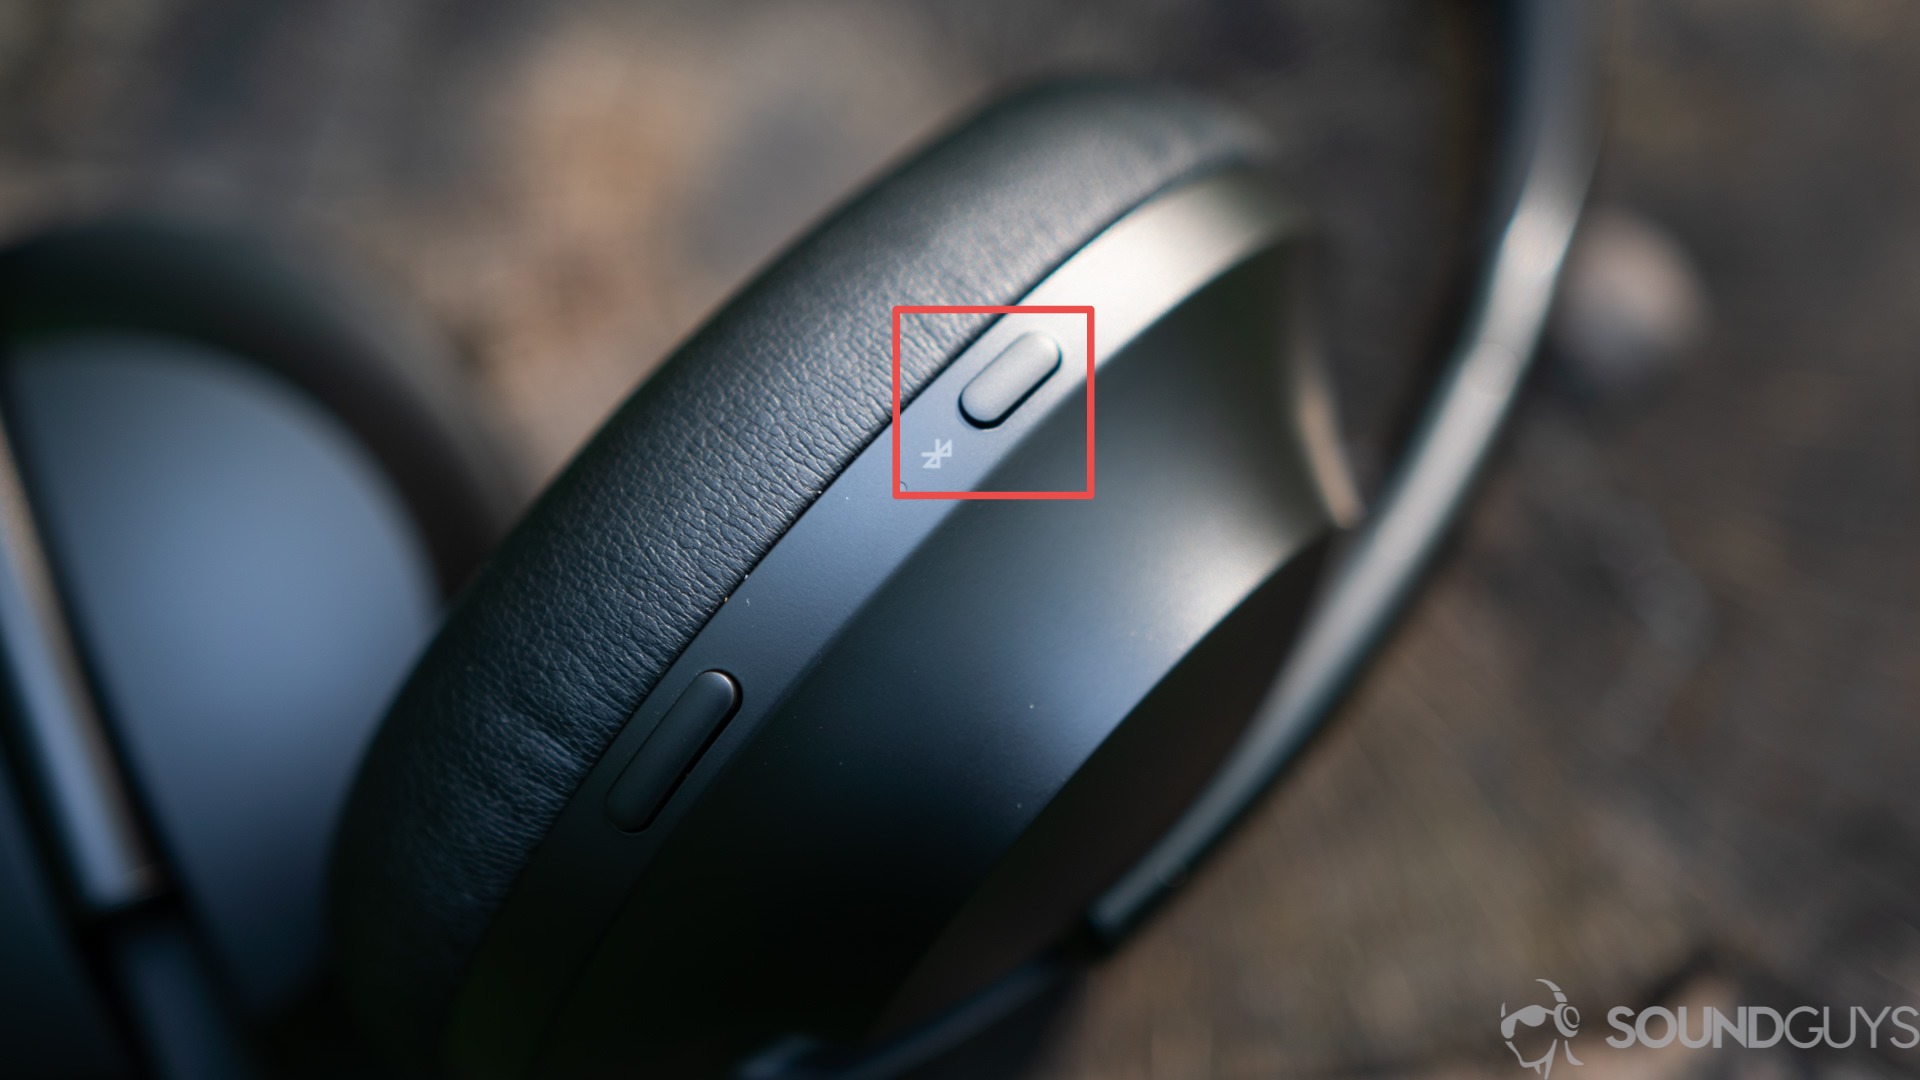 Bose Noise Cancelling Headphones 700 with Power button annotated